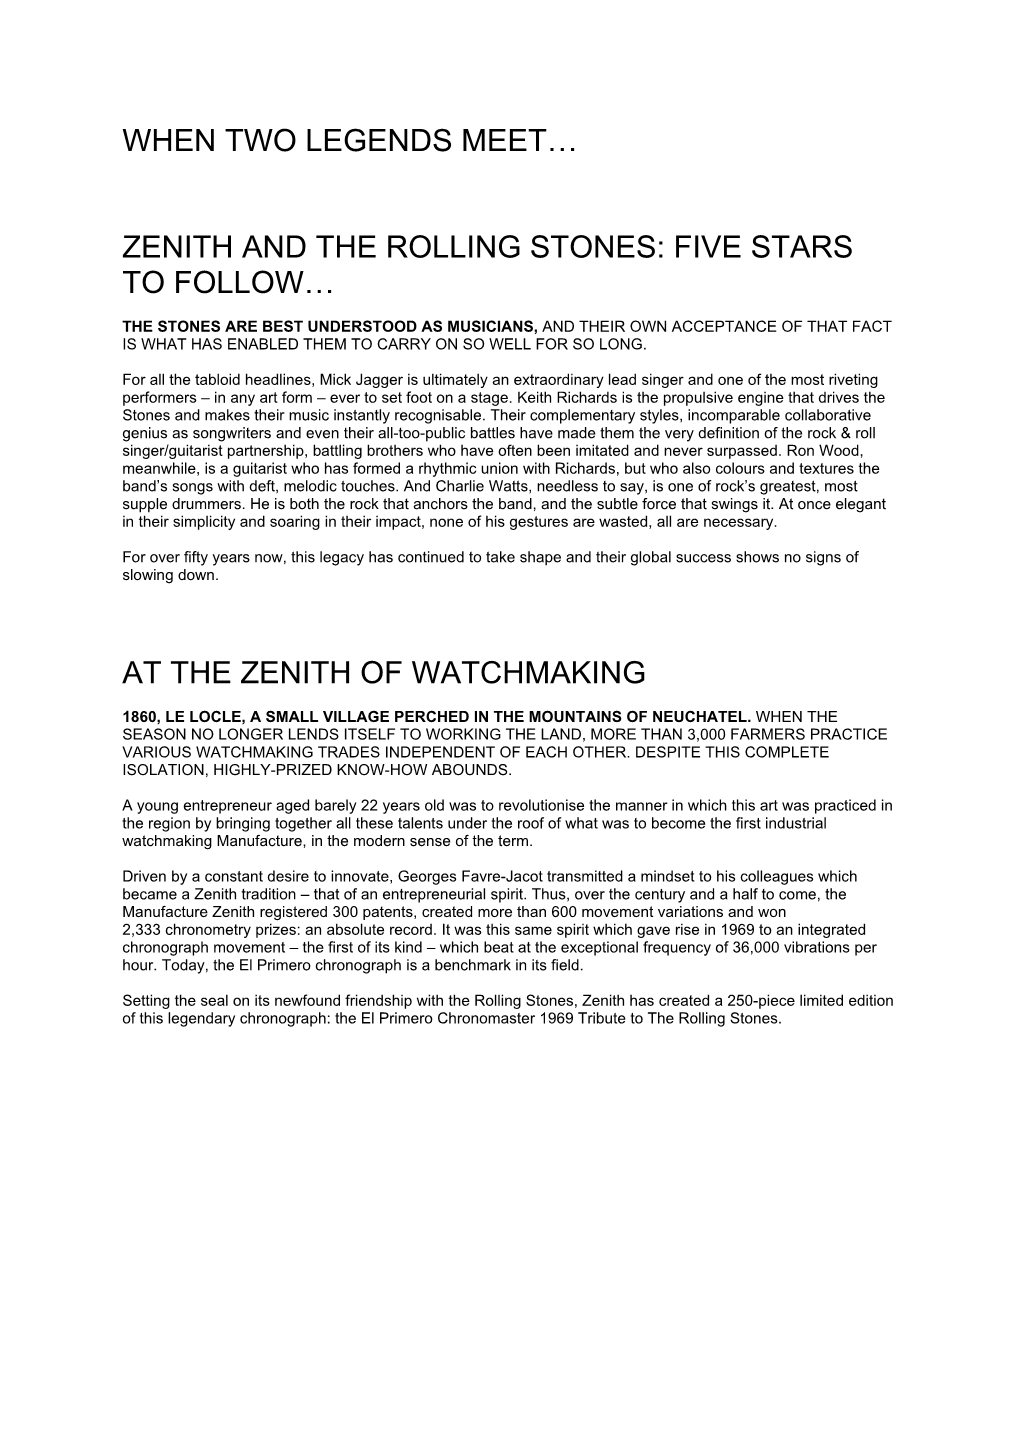 Zenith and the Rolling Stones: Five Stars to Follow